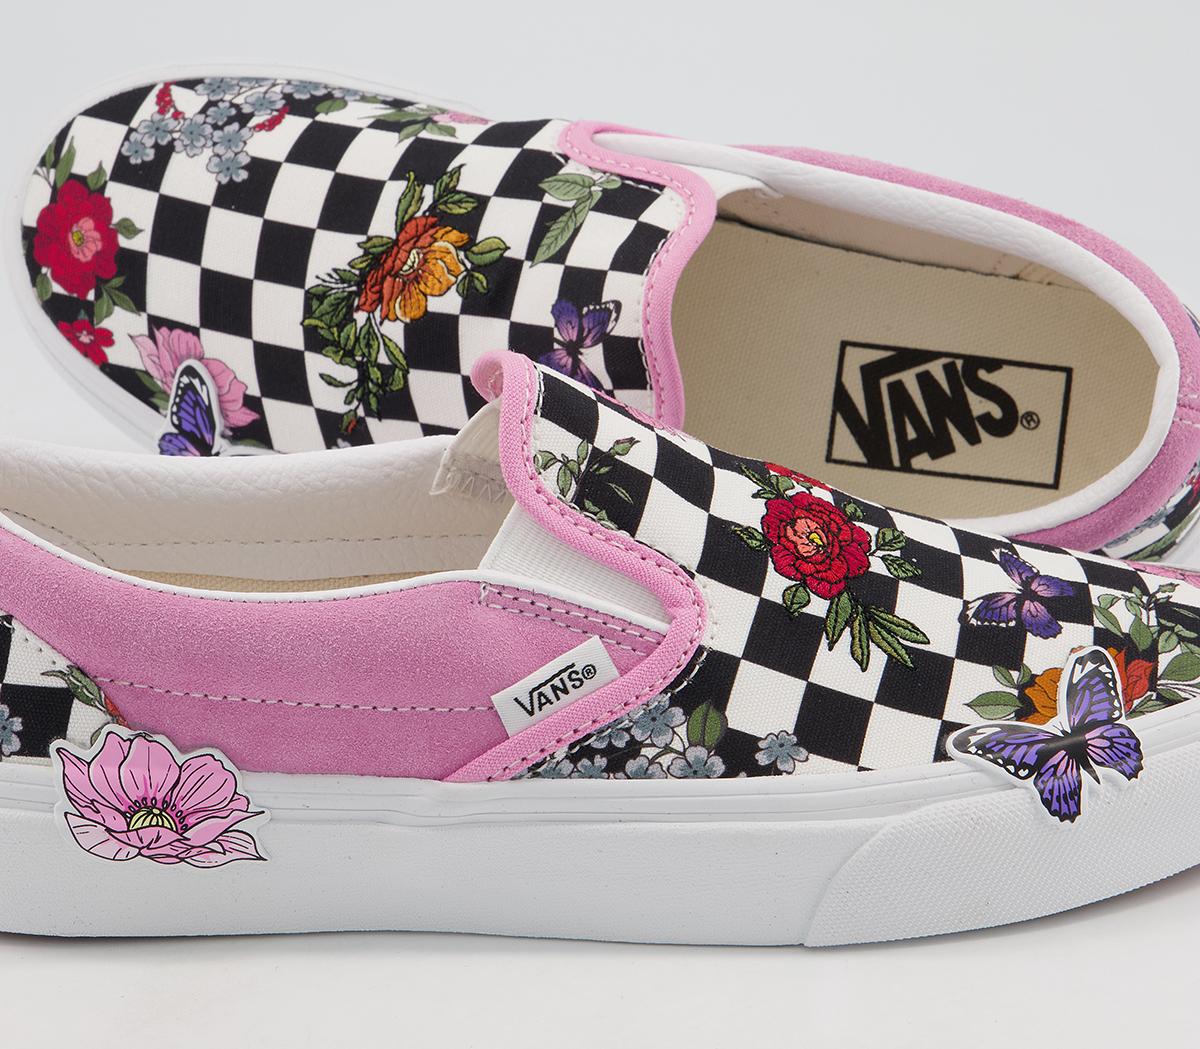 Vans Vans Classic Slip On Trainers Pink Embroidered Floral Checkerboard ...